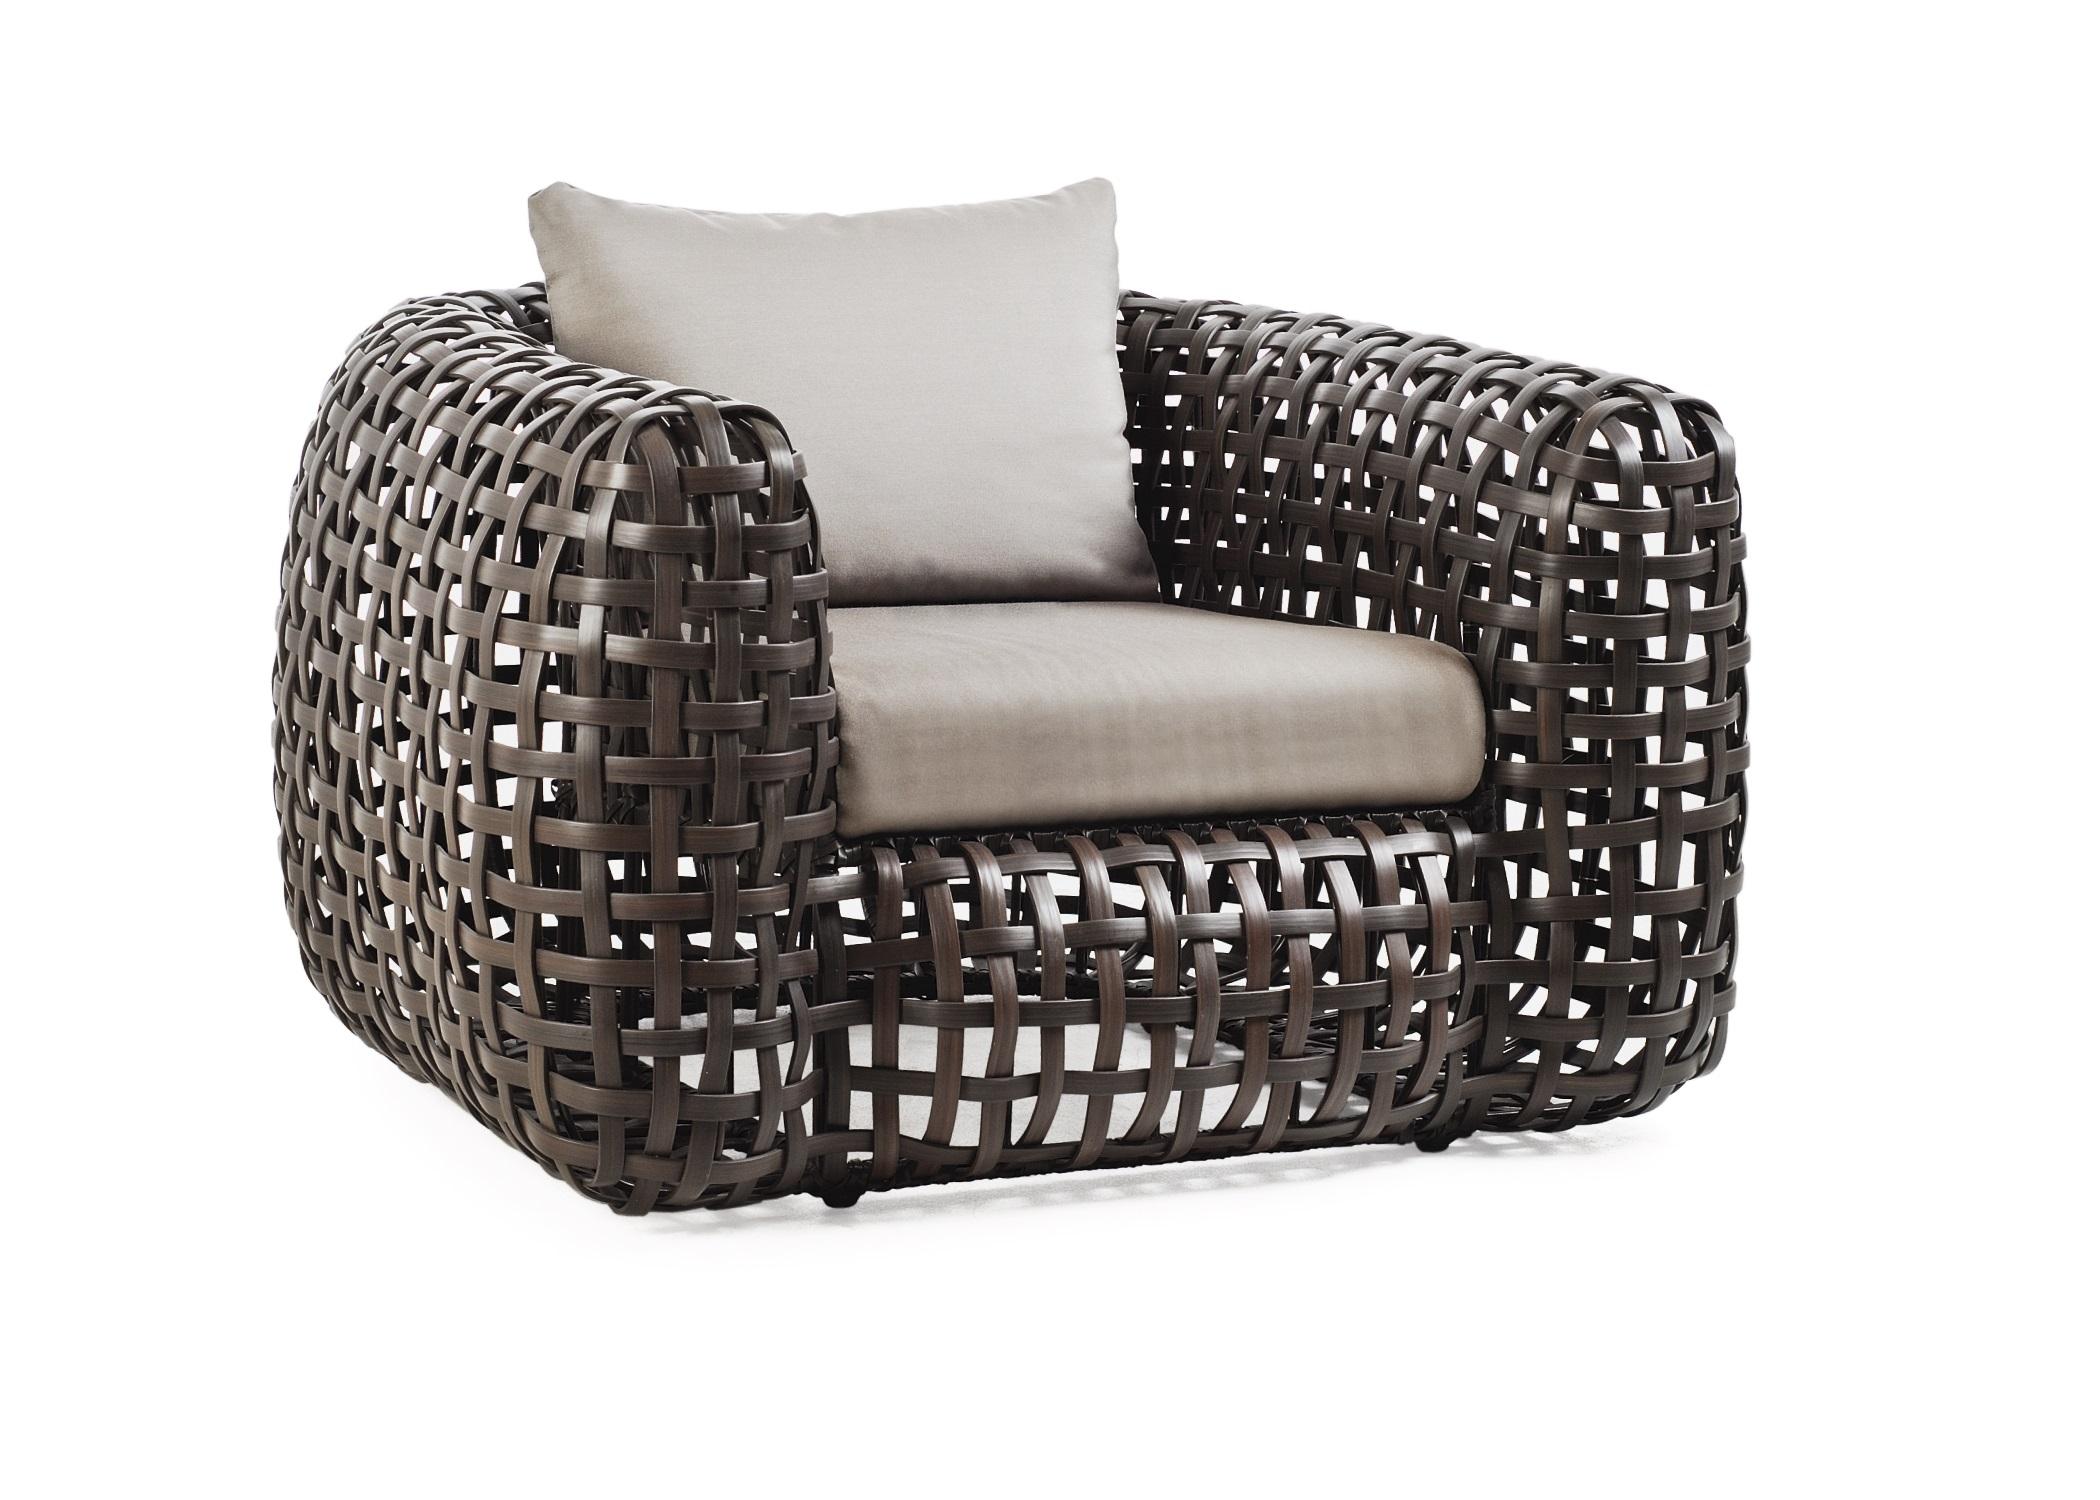 Outdoor matilda easy armchair by Kenneth Cobonpue.
Materials: Polyethelene. Aluminum.
Also available in other colors and for indoors.
Dimensions: 100cm x 110cm x H 63cm.

The same principle of a woven basket is used in making Matilda. This vast